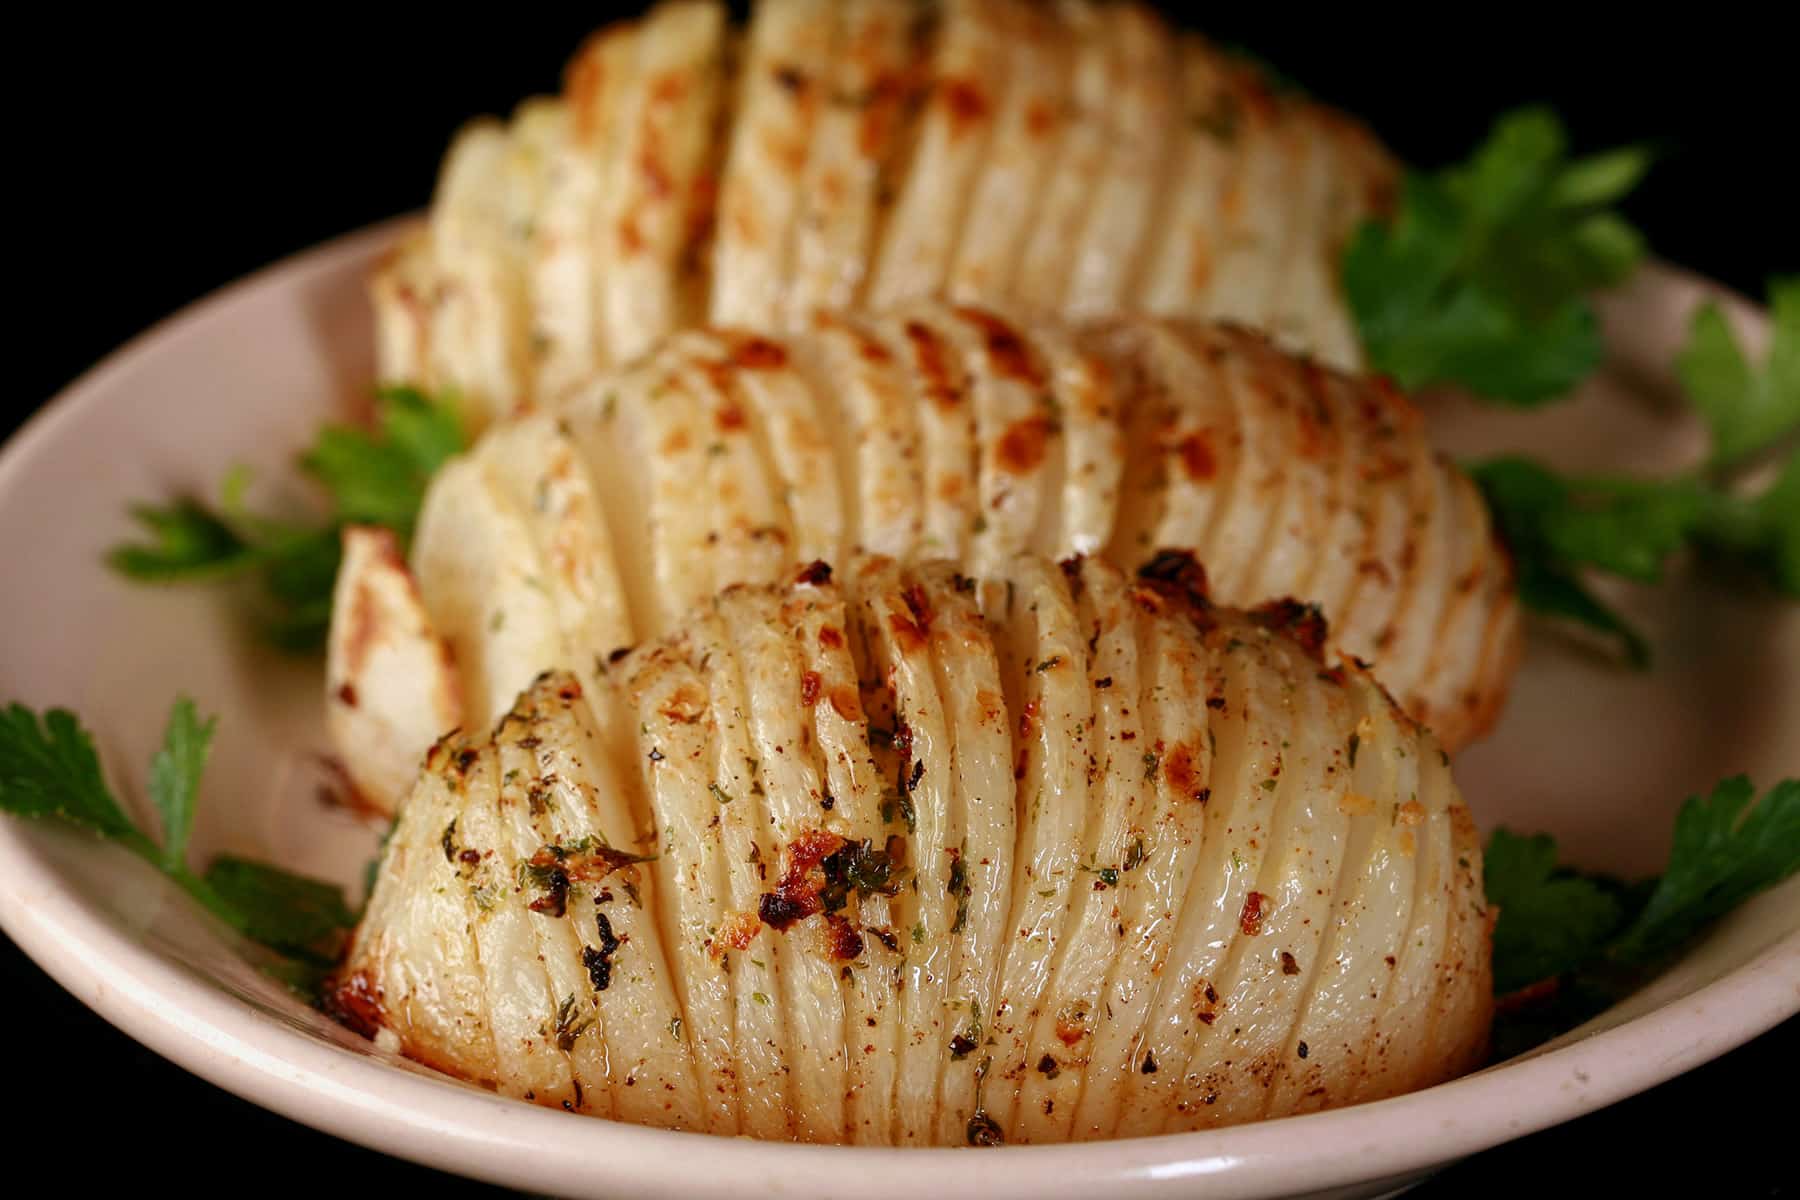 3 hasselback turnips on a plate.